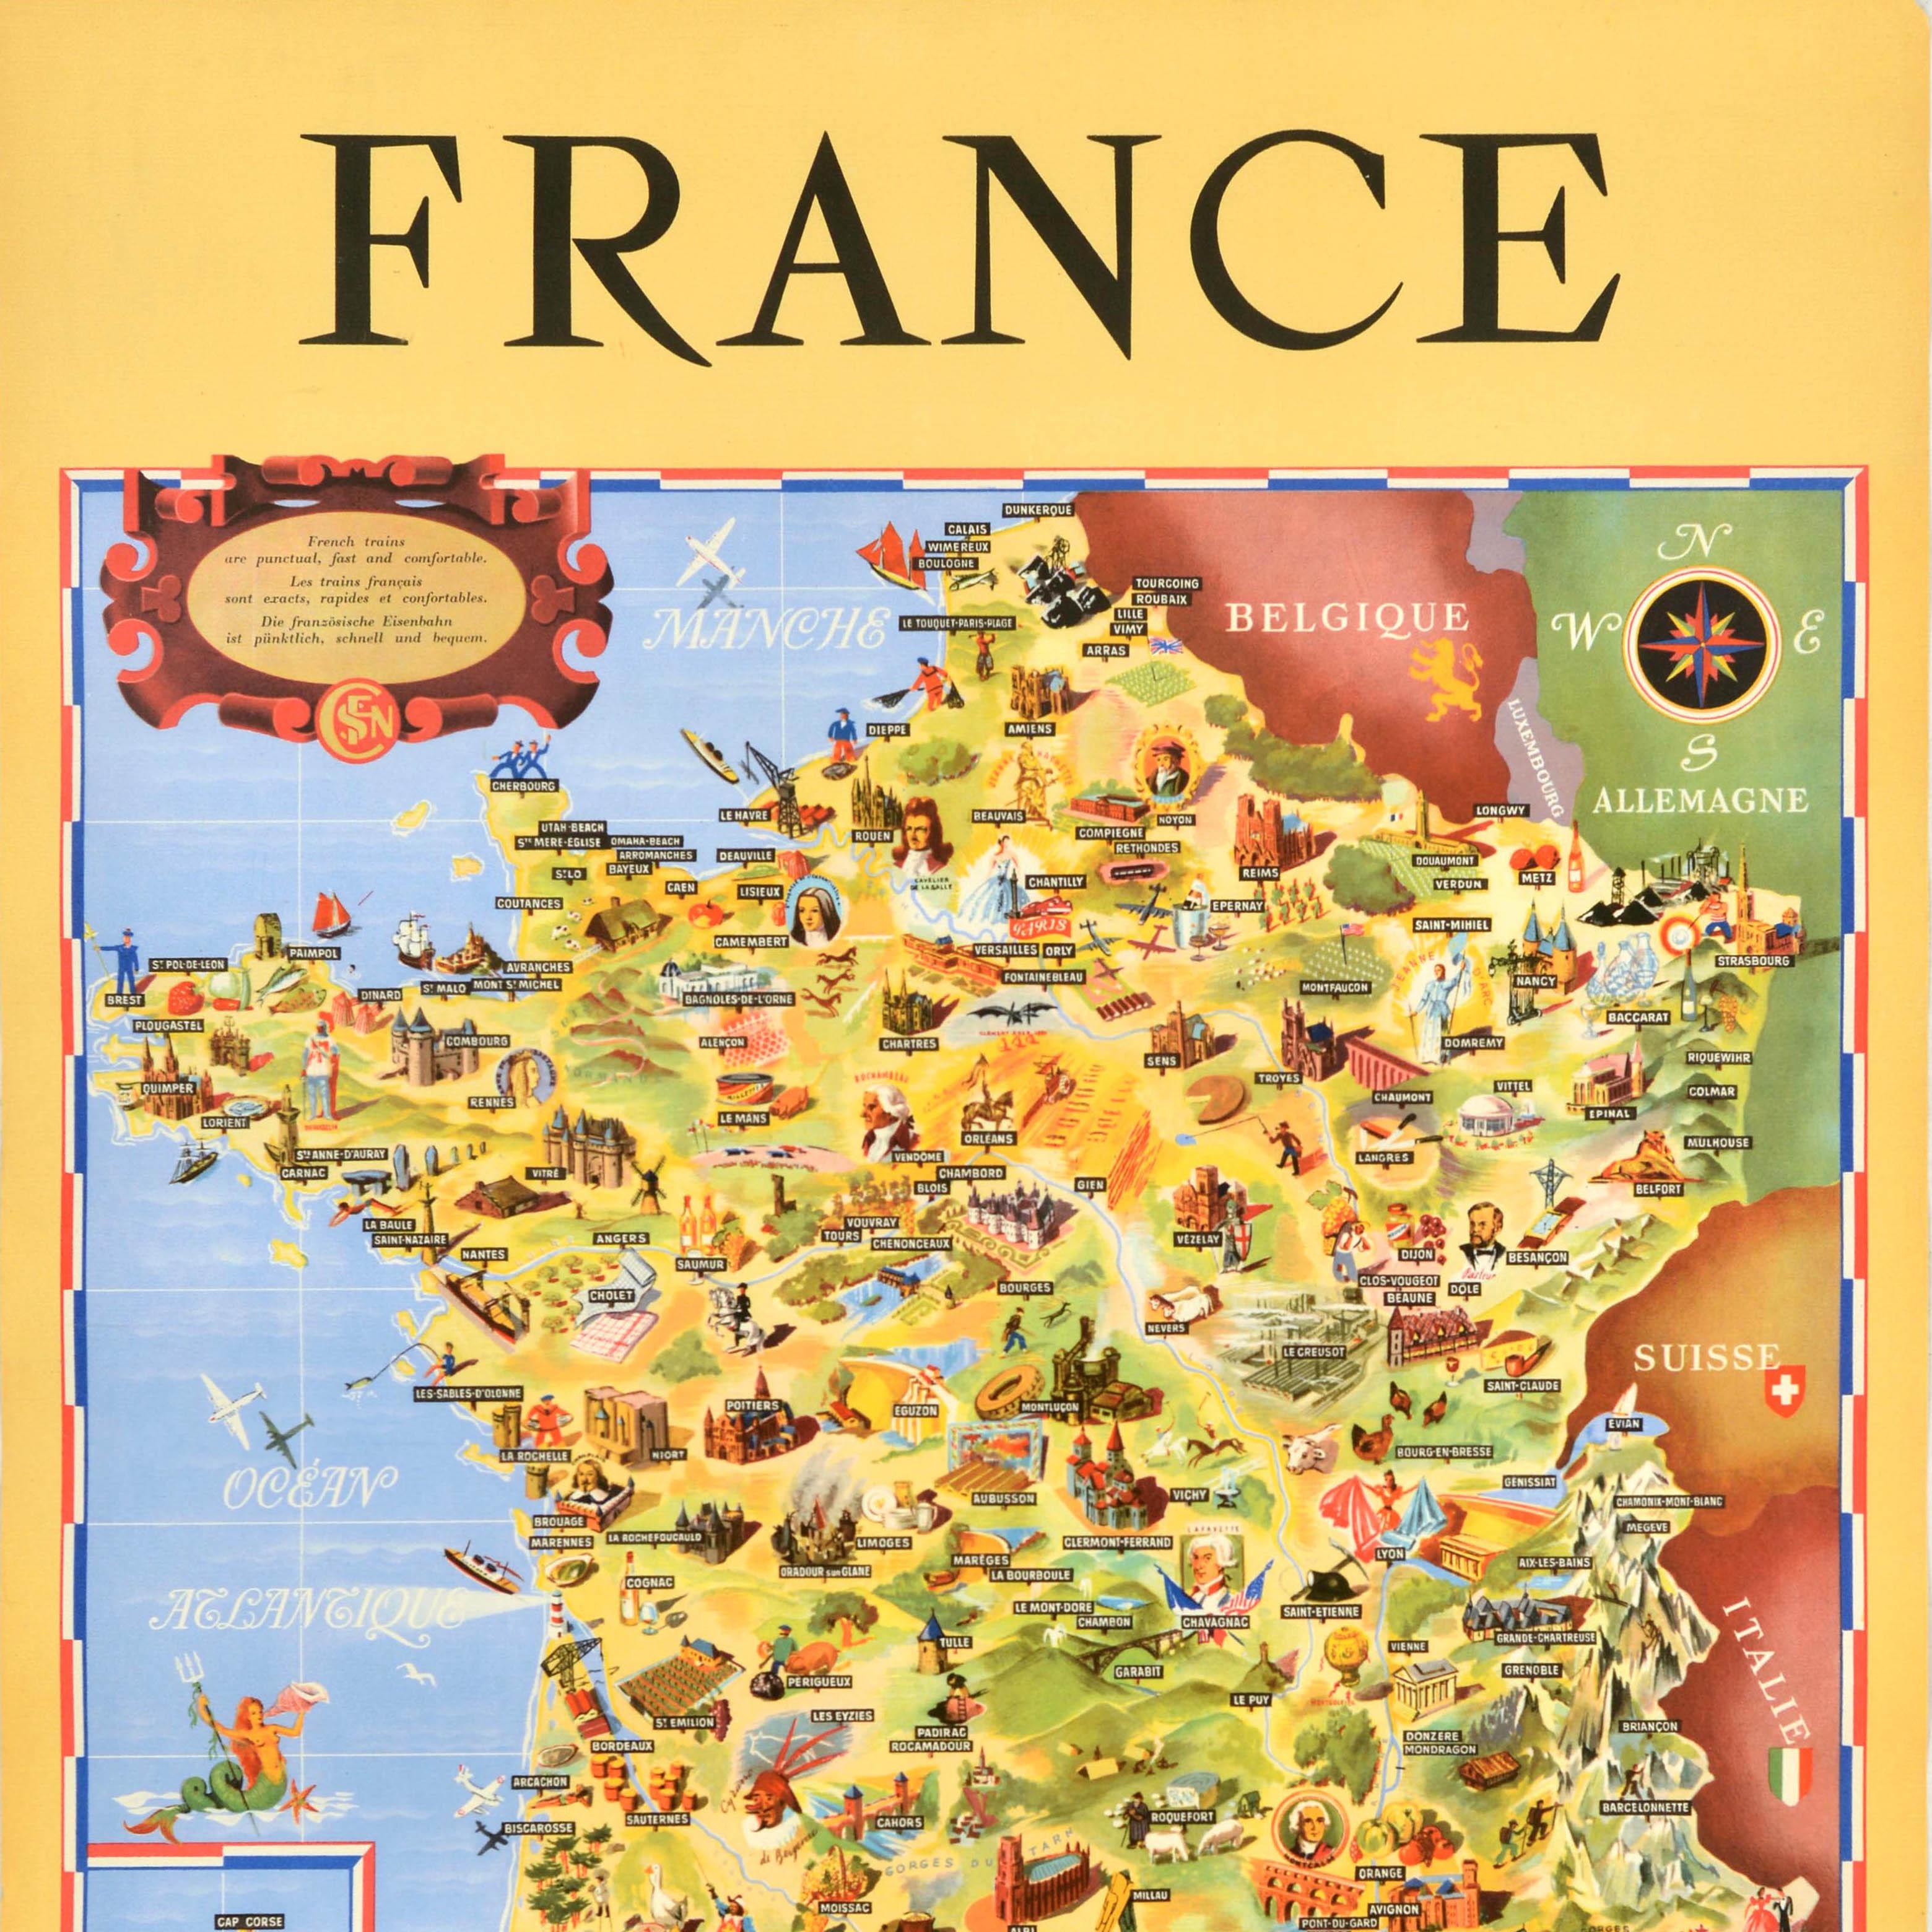 Original Vintage Rail Travel Map Poster France Map SNCF National French Railway - Orange Print by Unknown